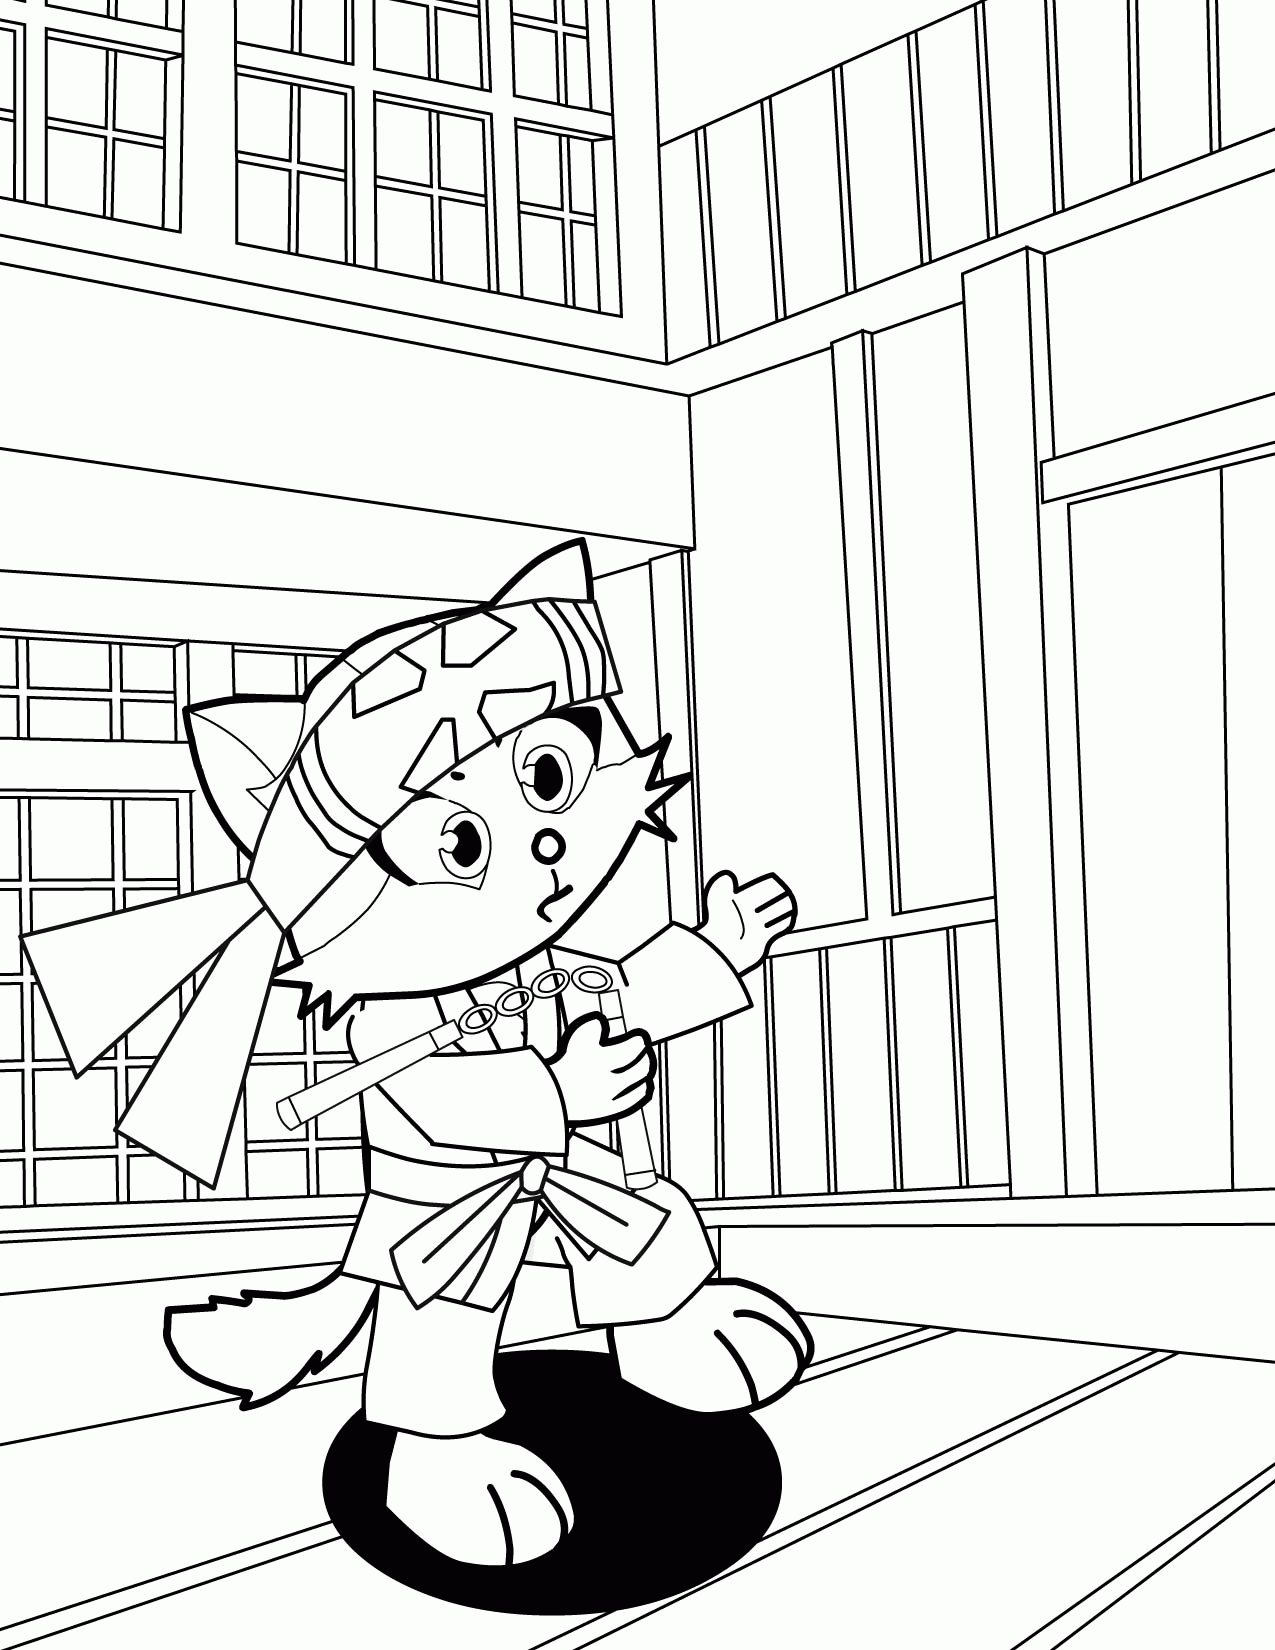 Karate Kat Coloring Page - Handipoints - Coloring Home